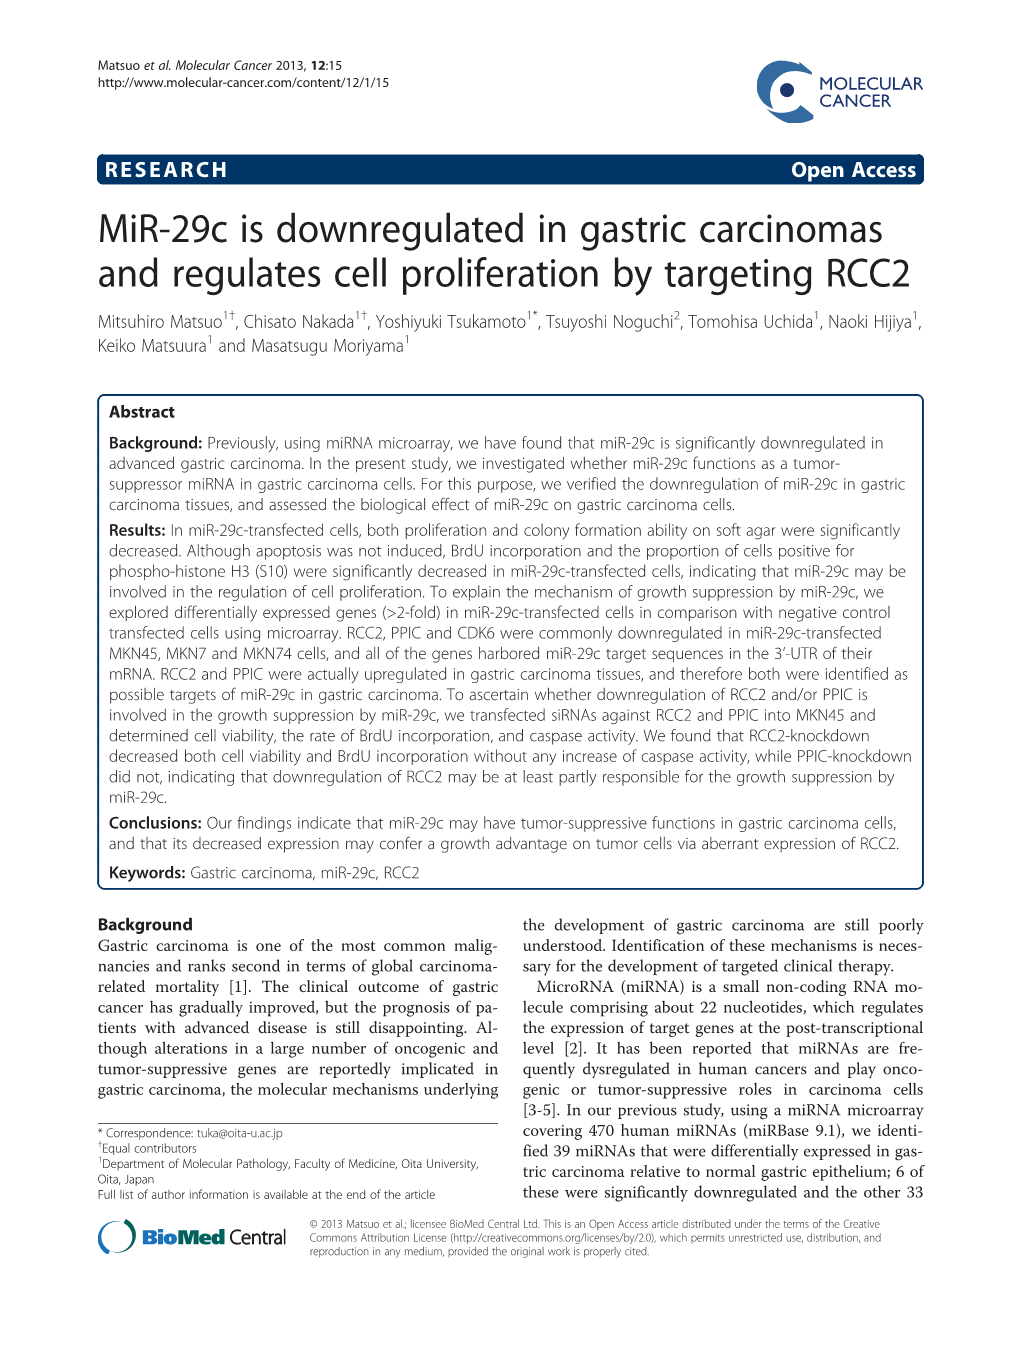 Mir-29C Is Downregulated in Gastric Carcinomas and Regulates Cell